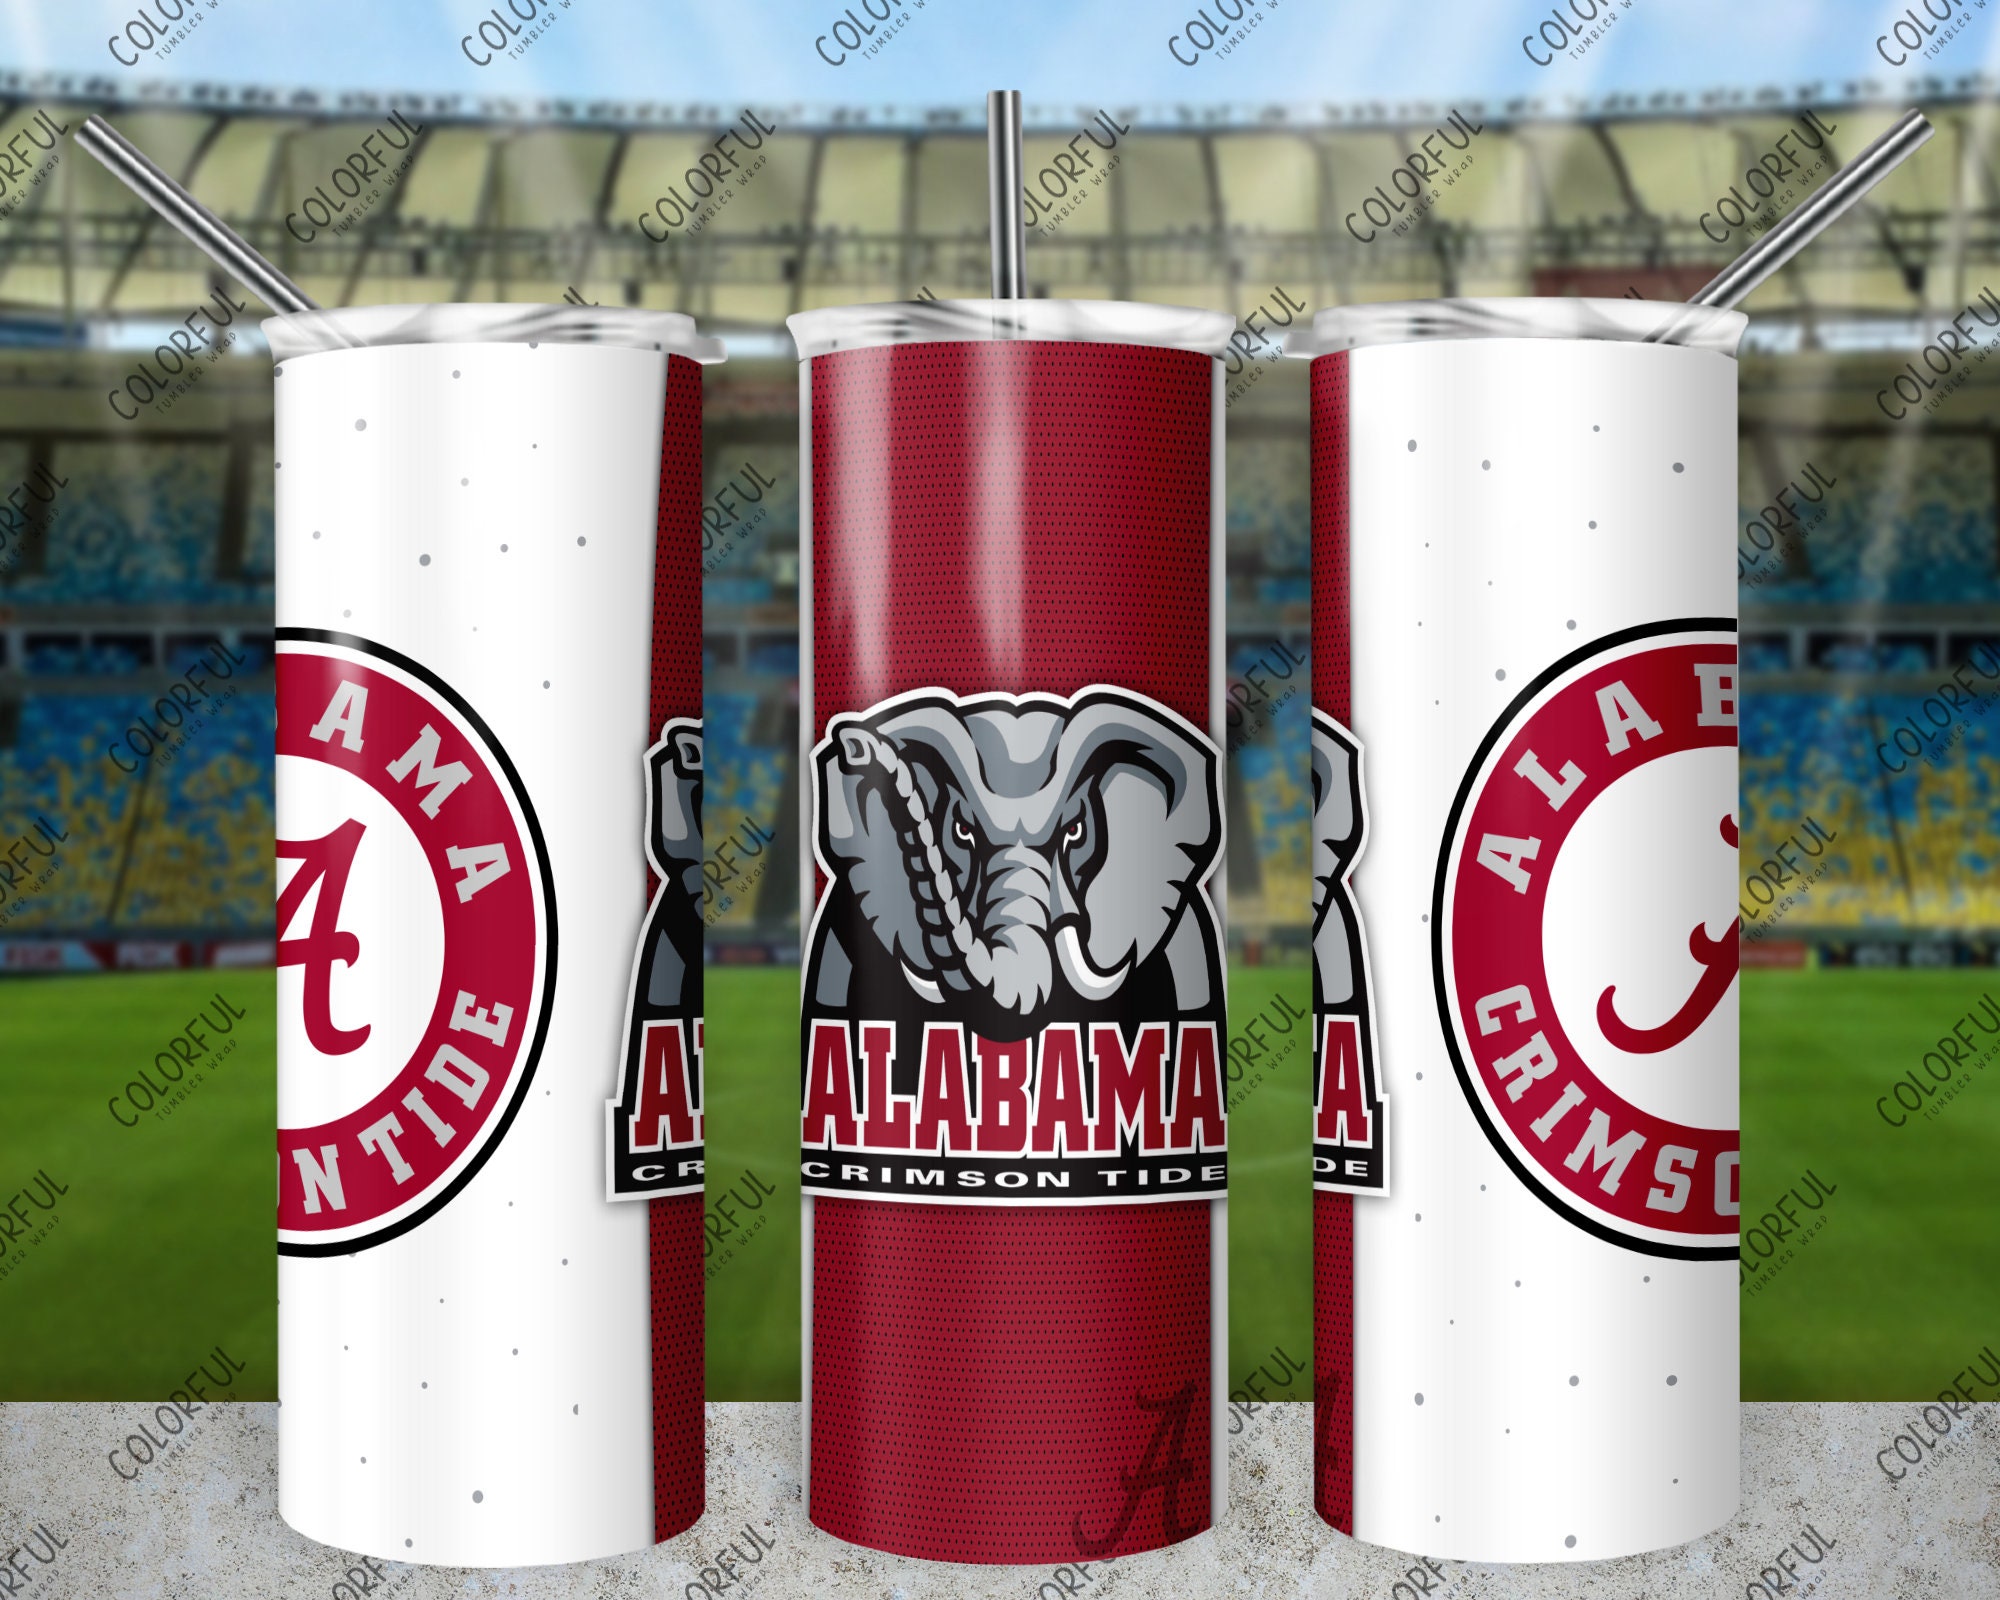 Kobalo Personalized Alabama State Funny Tumbler Custom Name And Number For  Men Women Friend Birthday…See more Kobalo Personalized Alabama State Funny